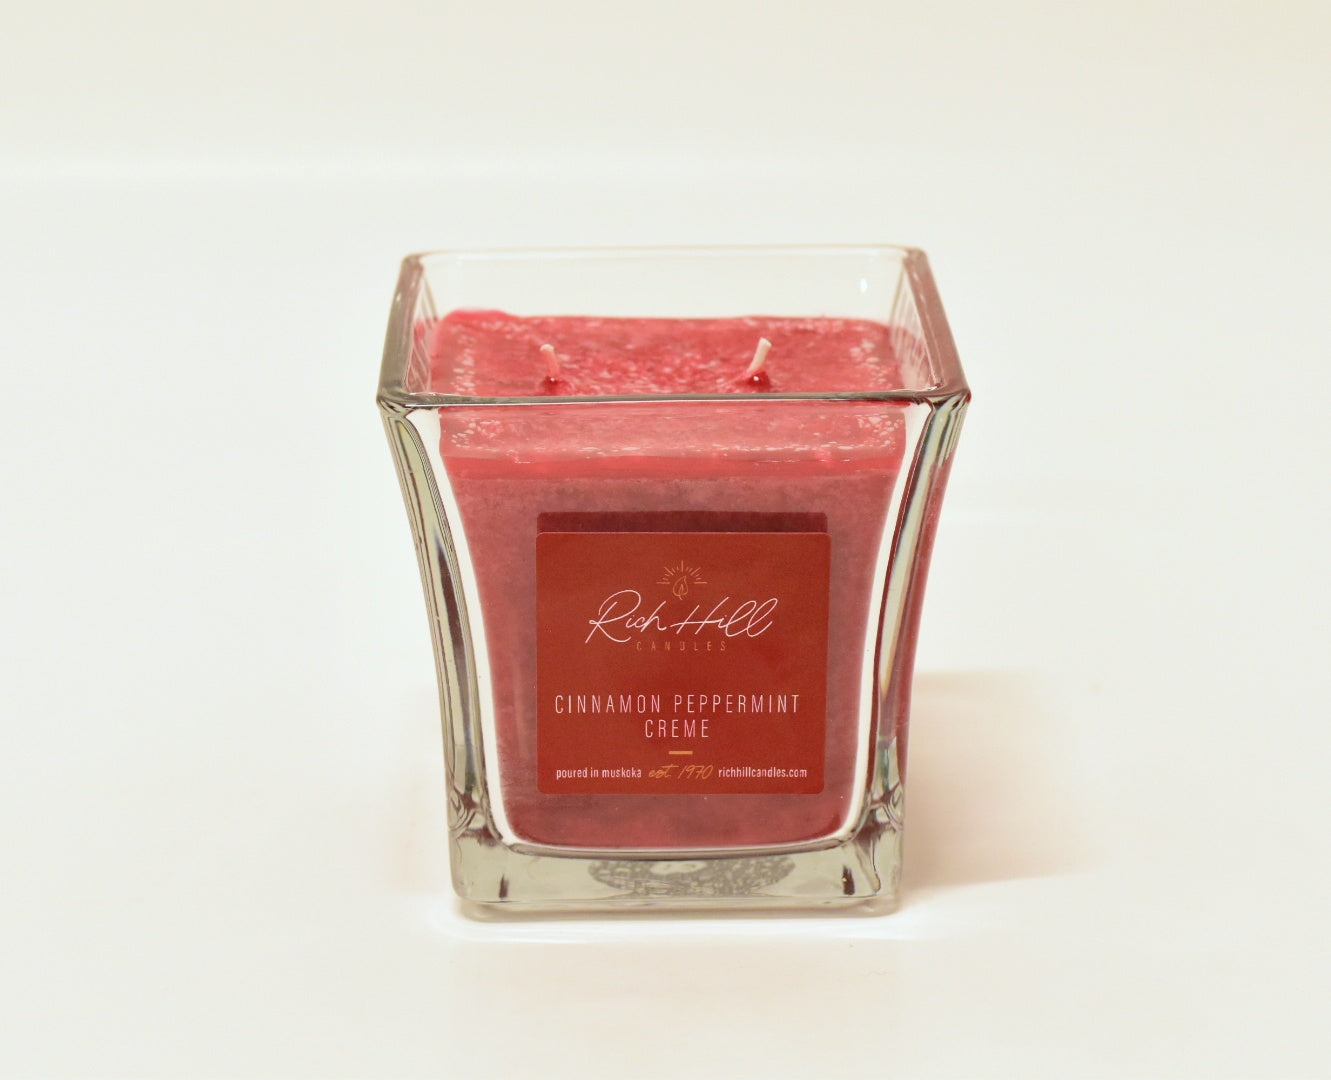 Cinnamon Peppermint Creme scented jar candles